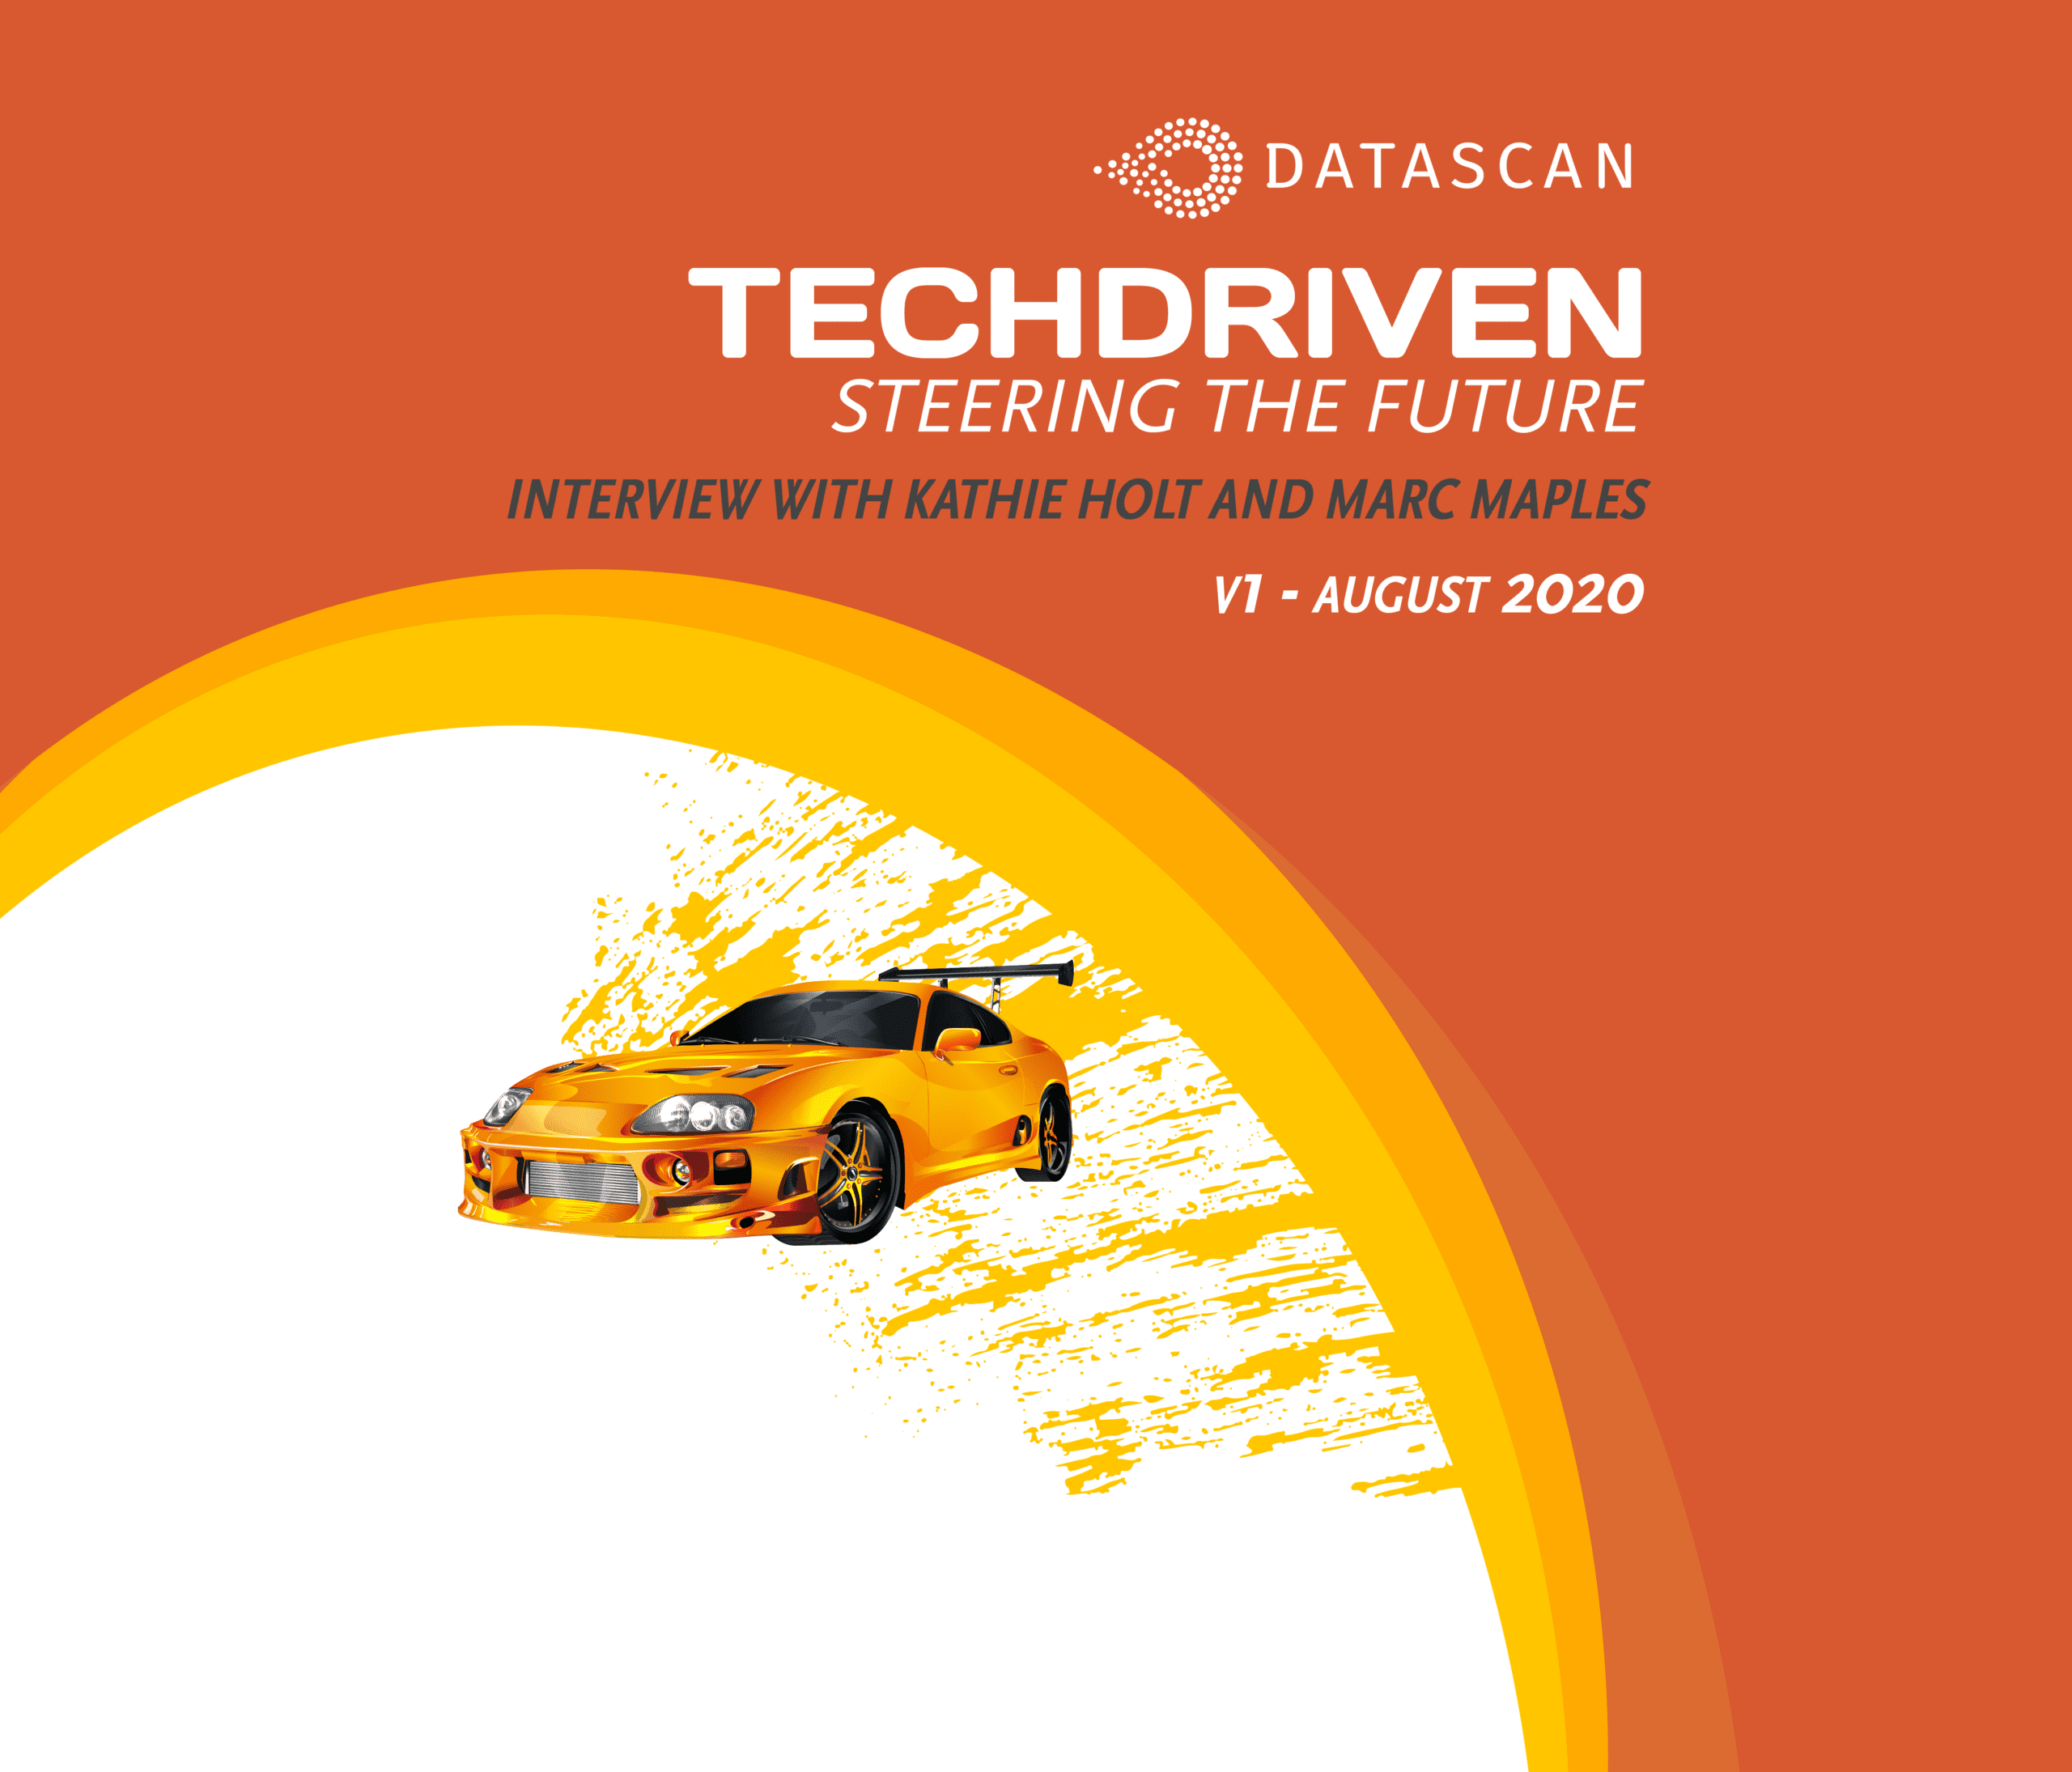 TechDriven: Interview with Kathie Holt and Marc Maples